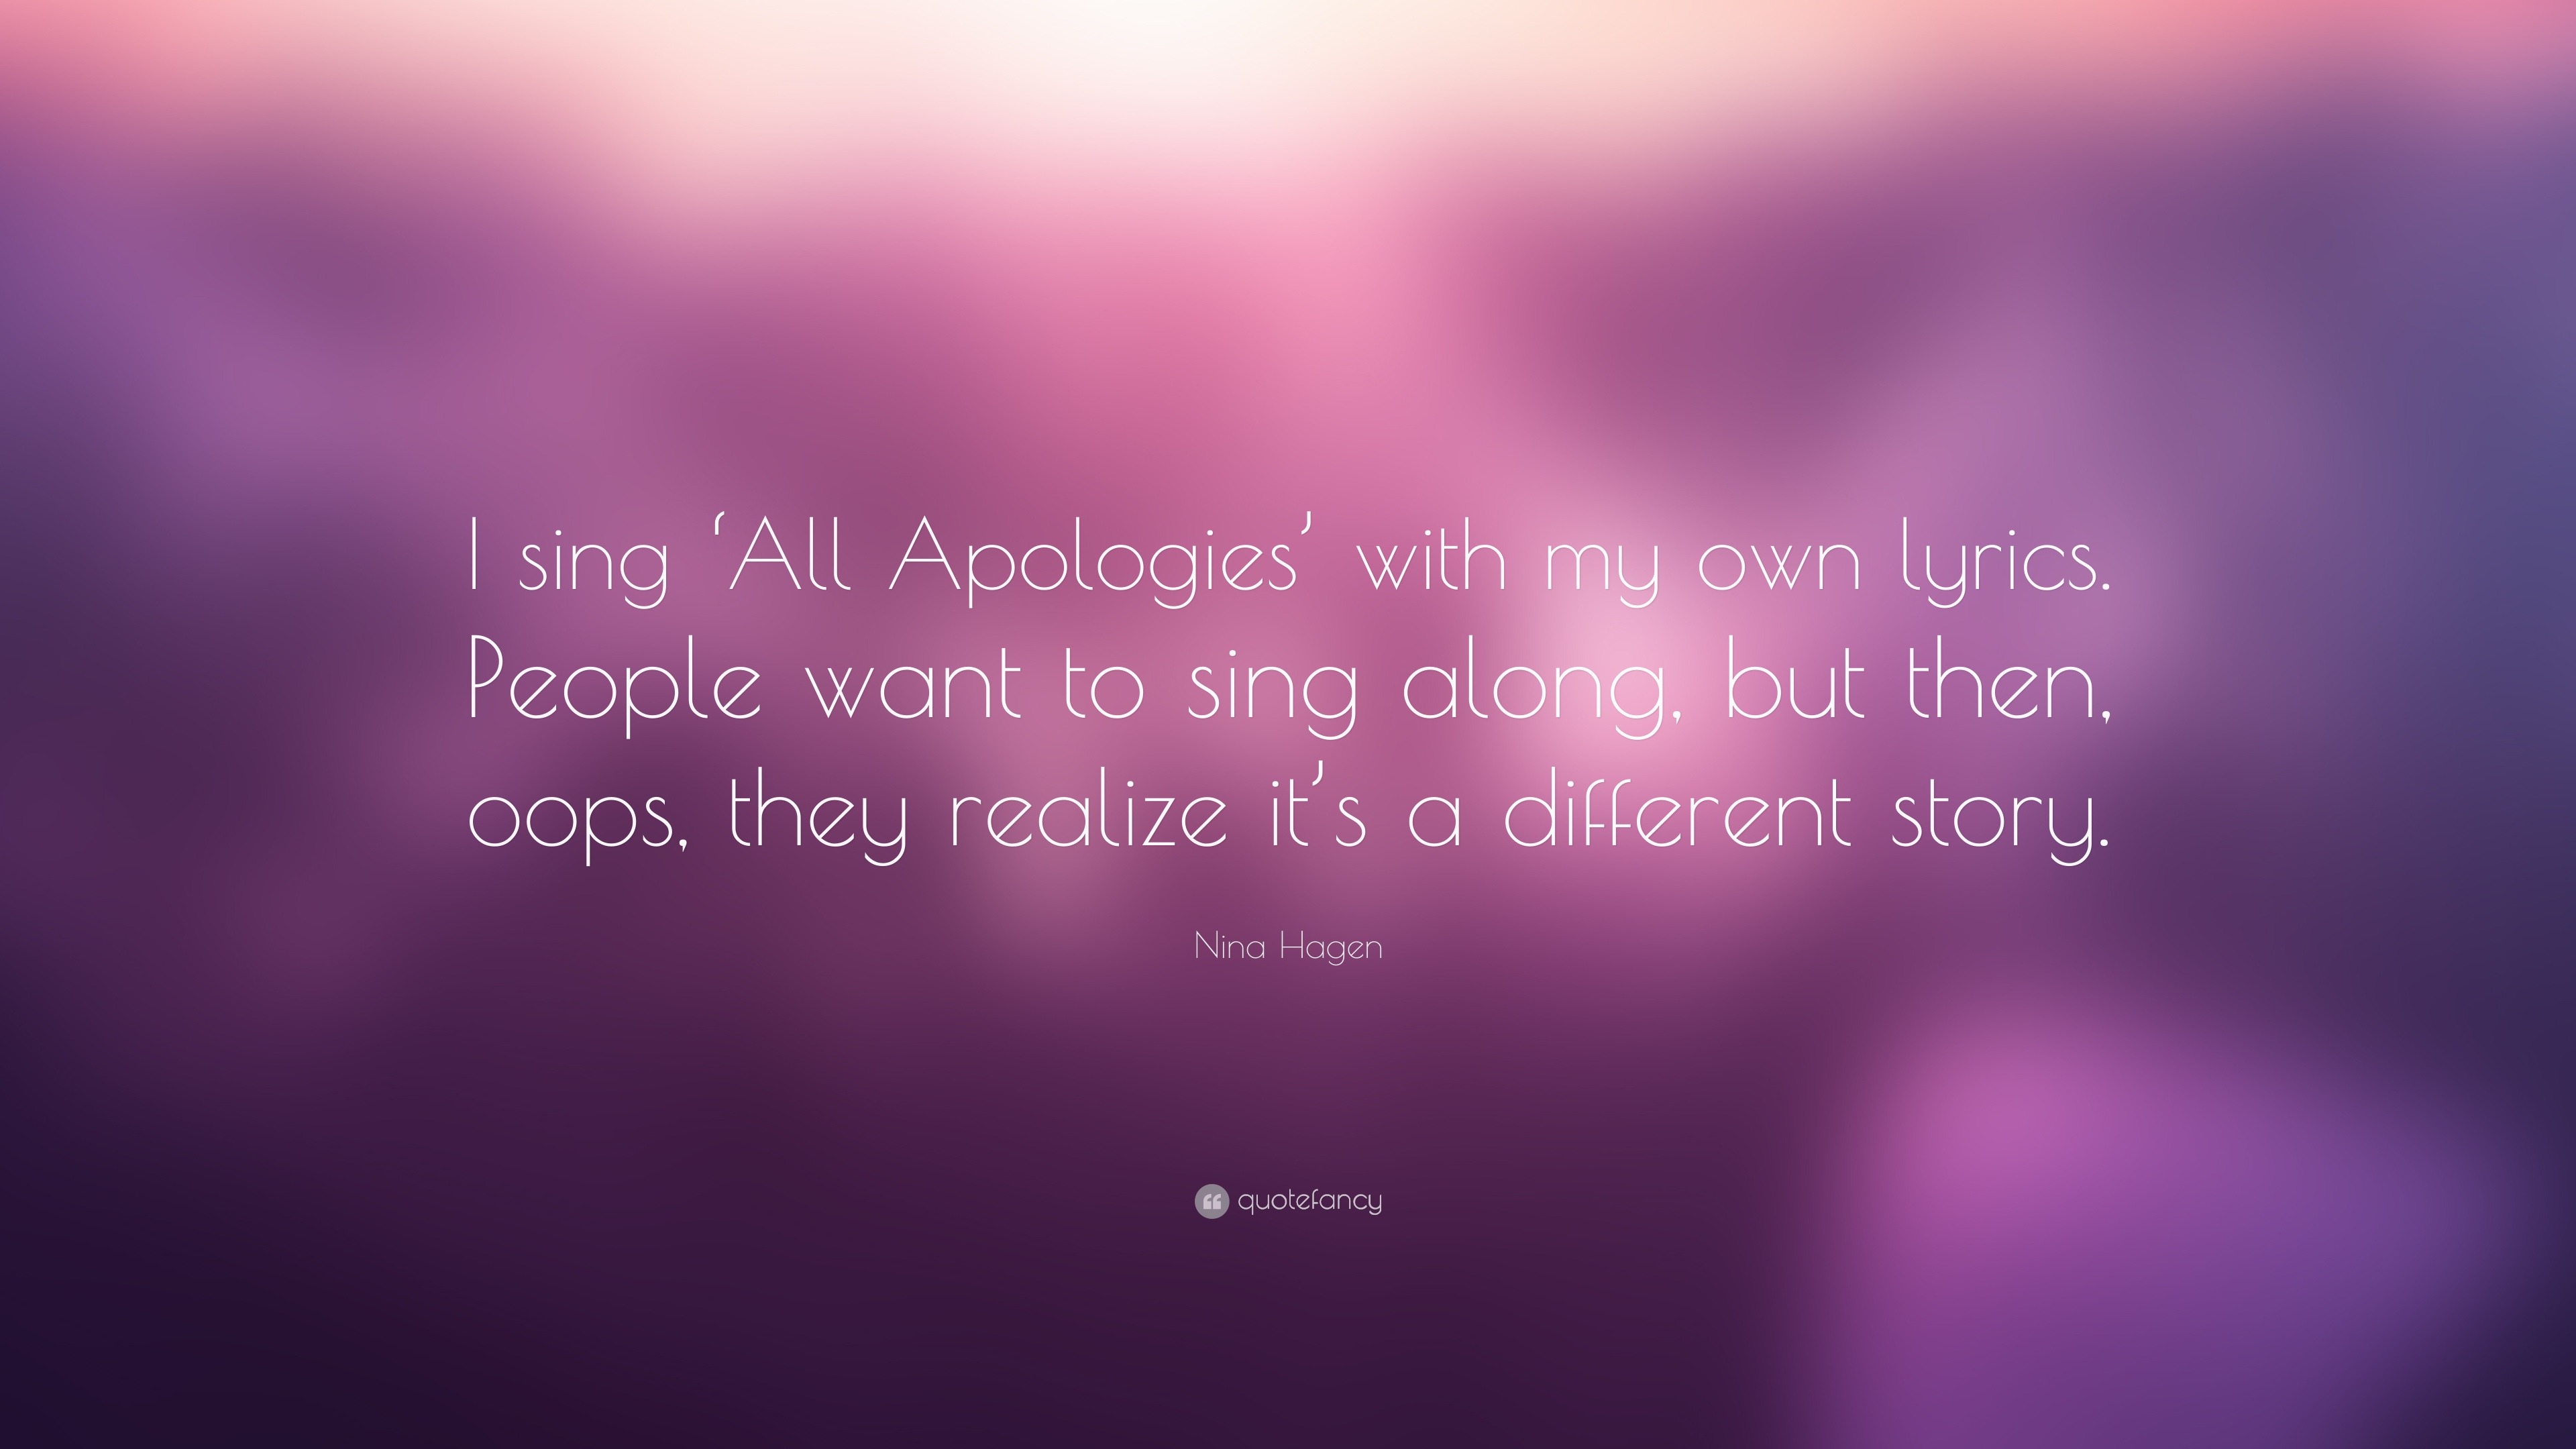 Nina Hagen Quote I Sing All Apologies With My Own Lyrics People Want To Sing Along But Then Oops They Realize It S A Different Stor 7 Wallpapers Quotefancy